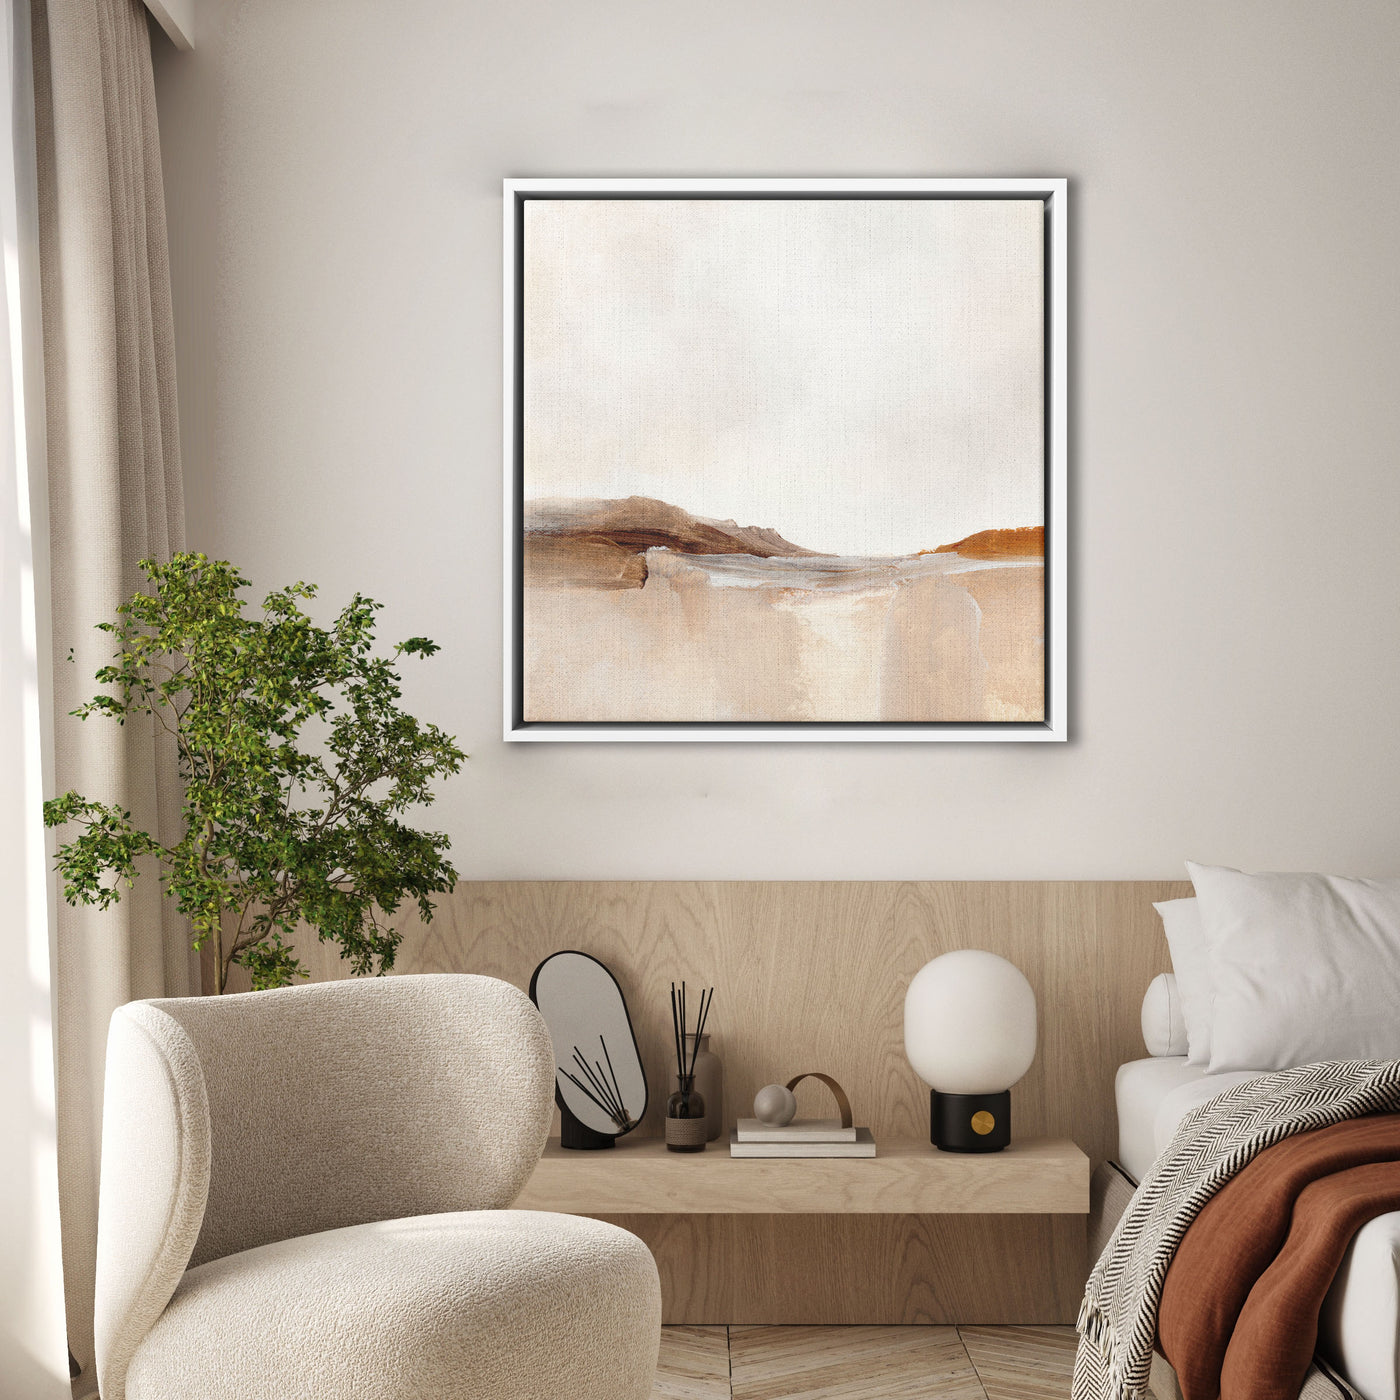 STATEMENT ART | COLORADO ABSTRACT